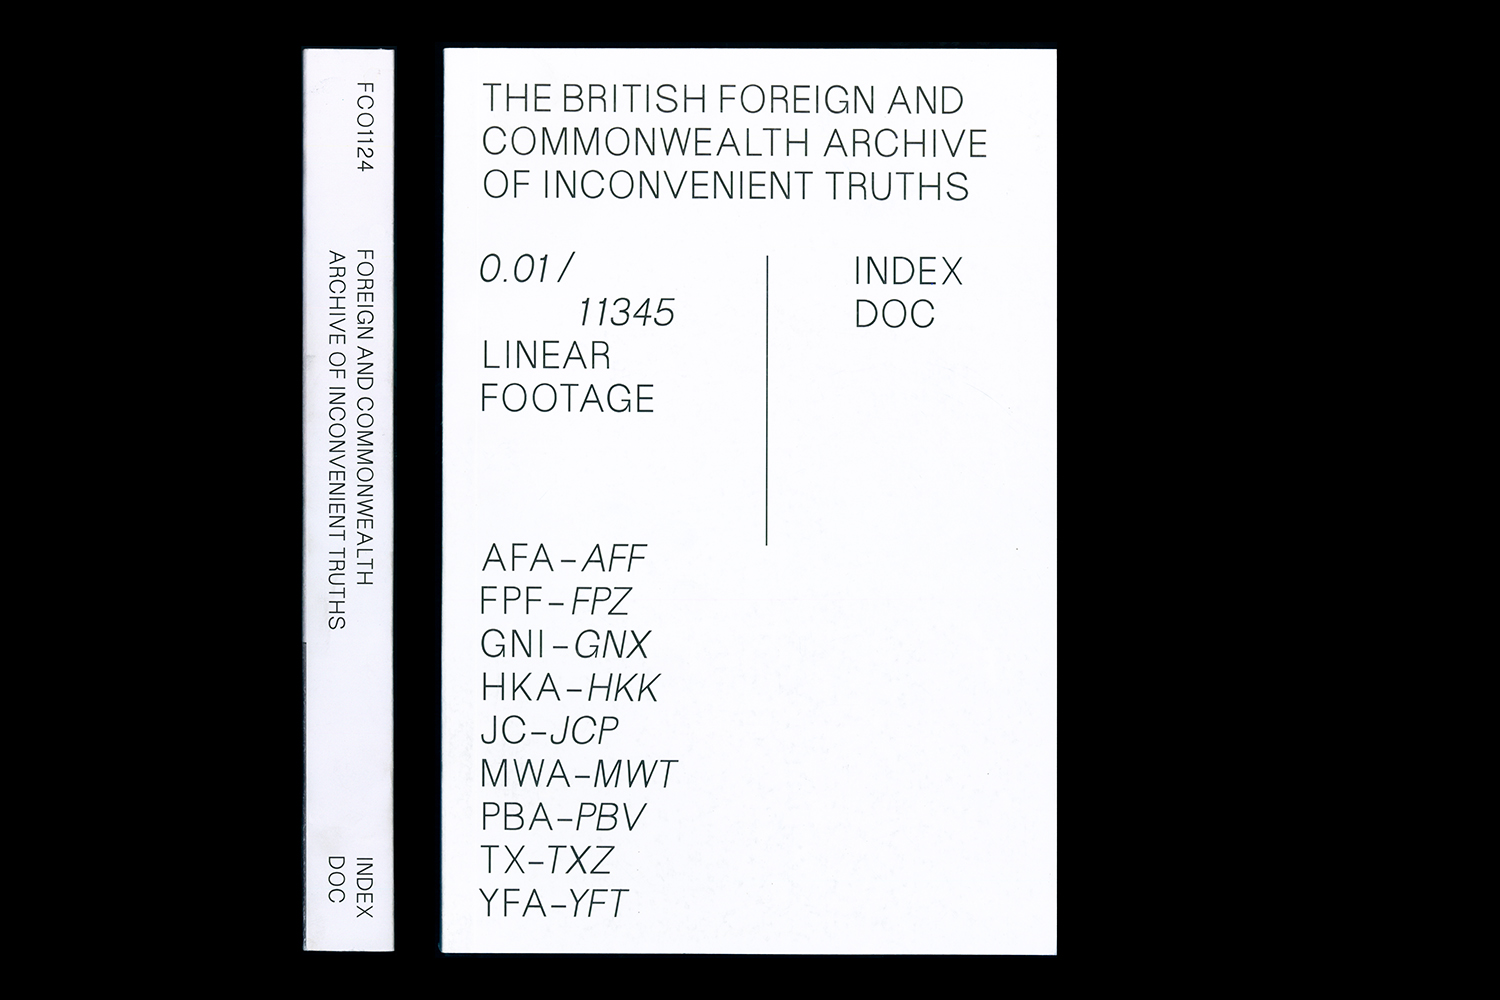 The British Foreign and Commonwealth Archive of Inconvenient Truths by Tom Finn